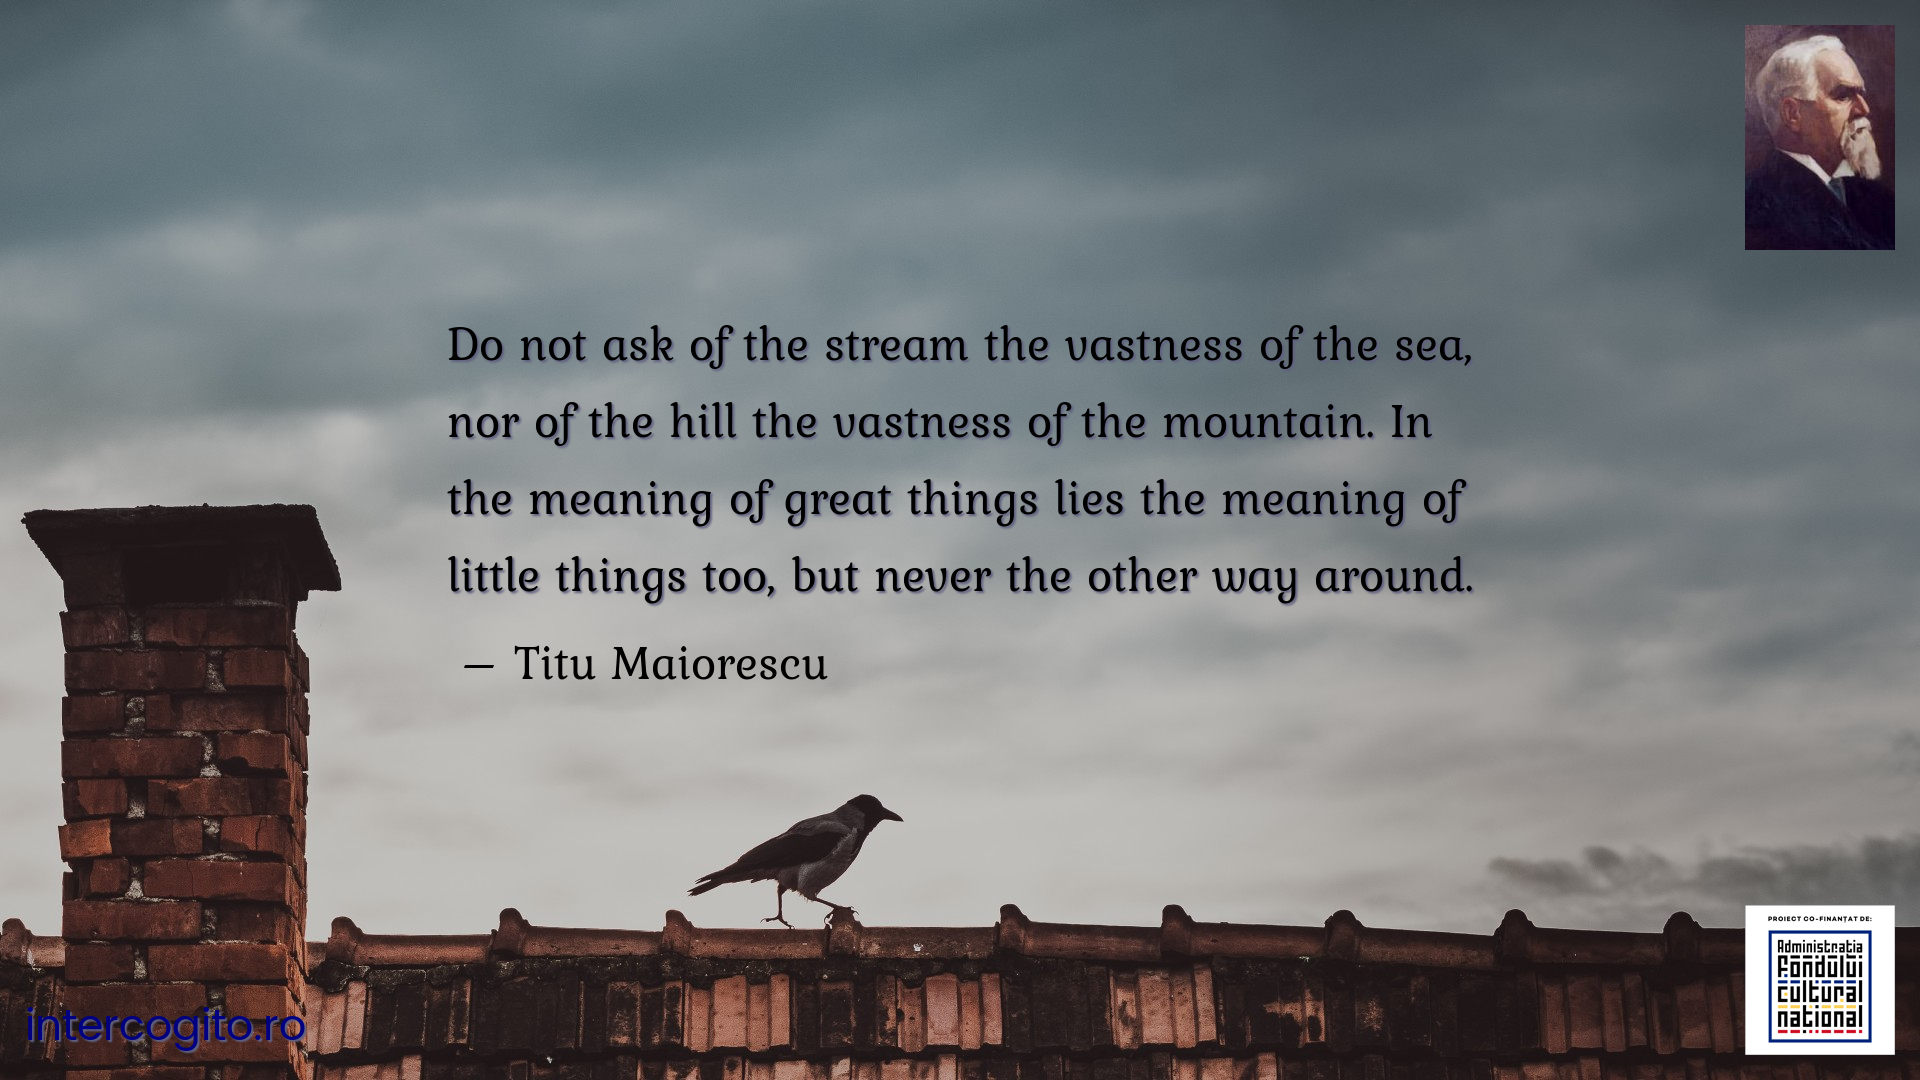 Do not ask of the stream the vastness of the sea, nor of the hill the vastness of the mountain. In the meaning of great things lies the meaning of little things too, but never the other way around.